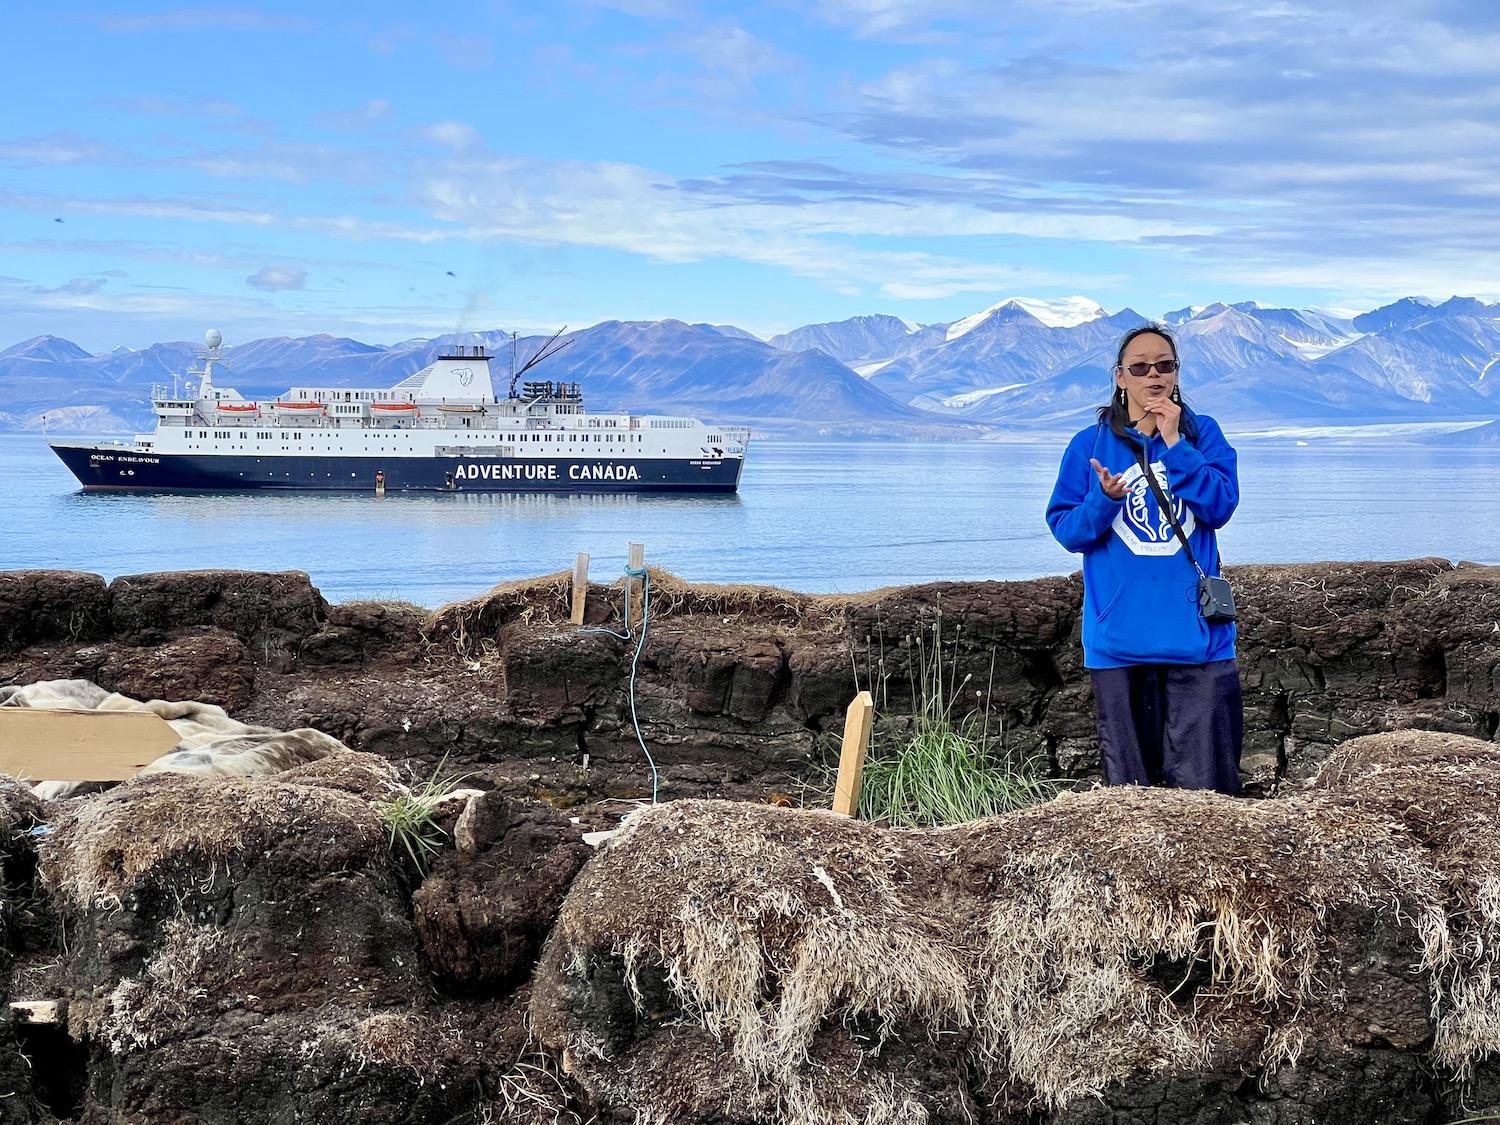 In 2022, Pond Inlet tour guide Georgina Pewatooalook shows Adventure Canada guests a sod house while the Ocean Endeavour waits in the proposed Tallurutiup Imanga National Marine Conservation Area.